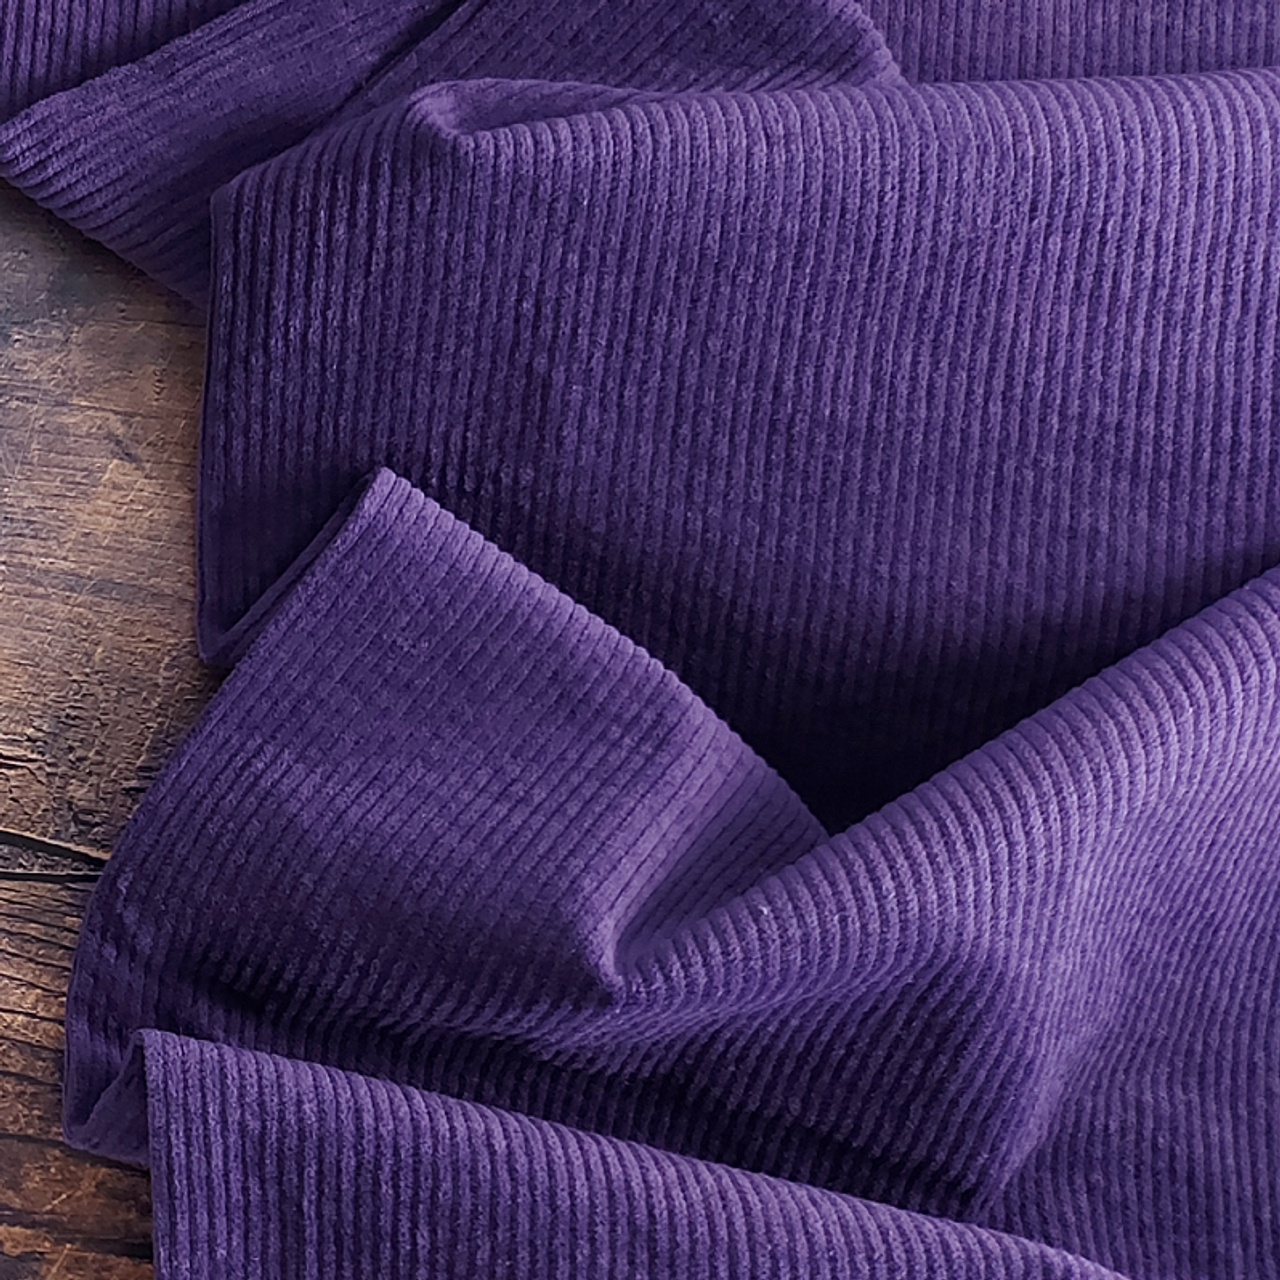 Stretch, woven, washed cotton corduroy fabric in beautiful colours